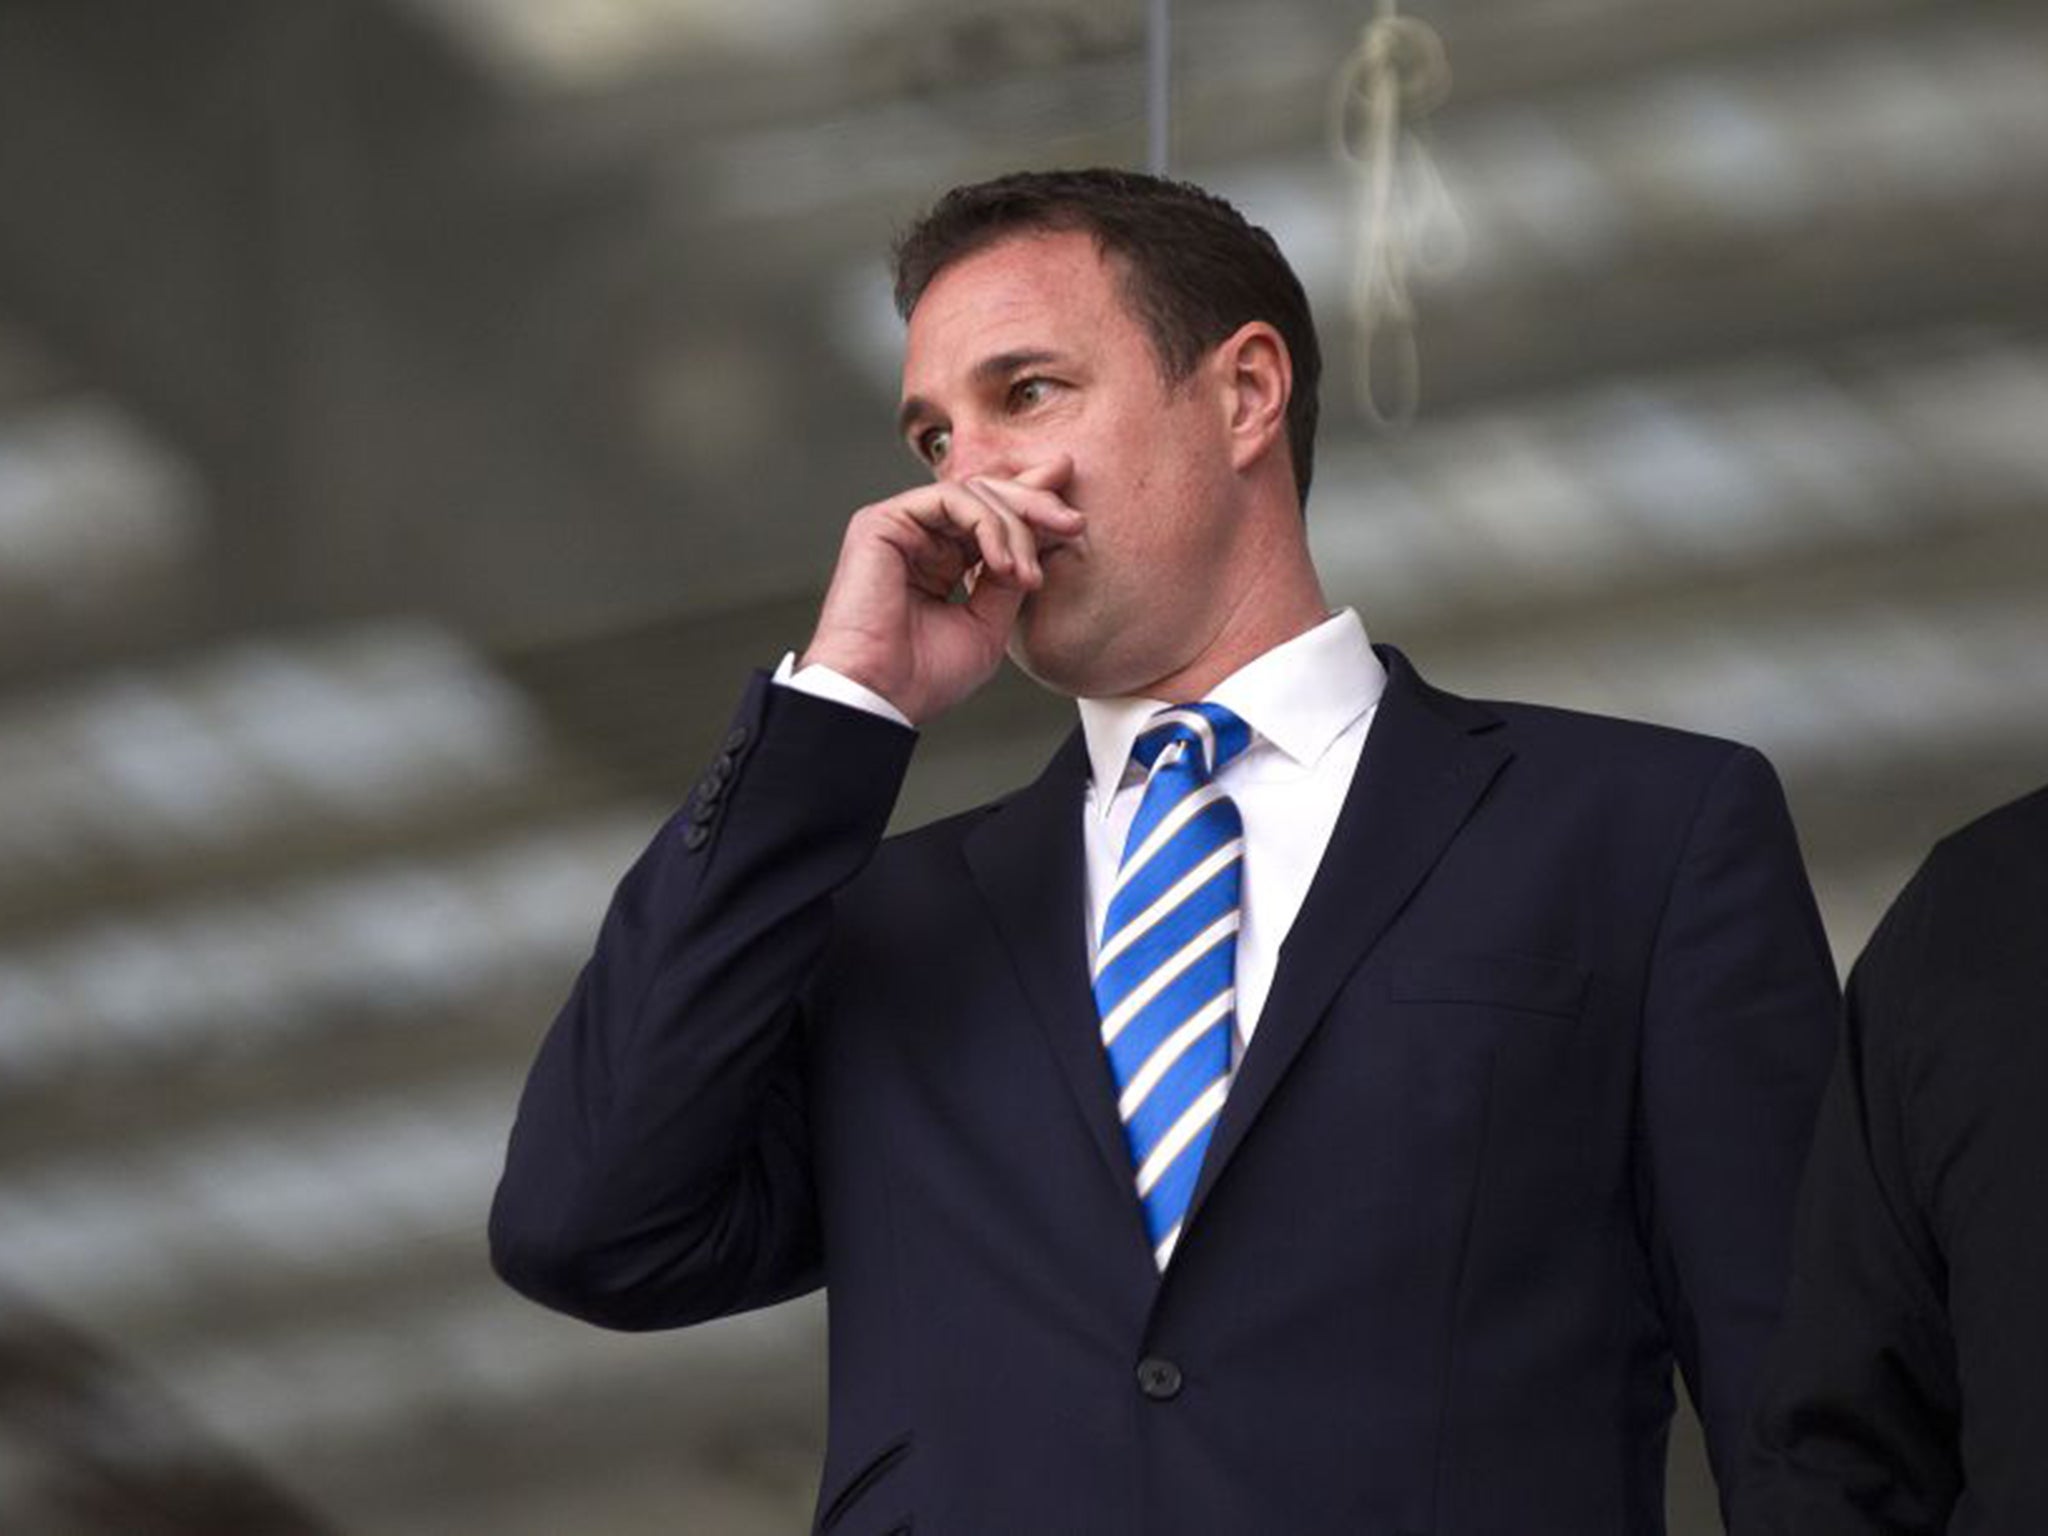 Malky Mackay only joined Wigan as manager in November last year